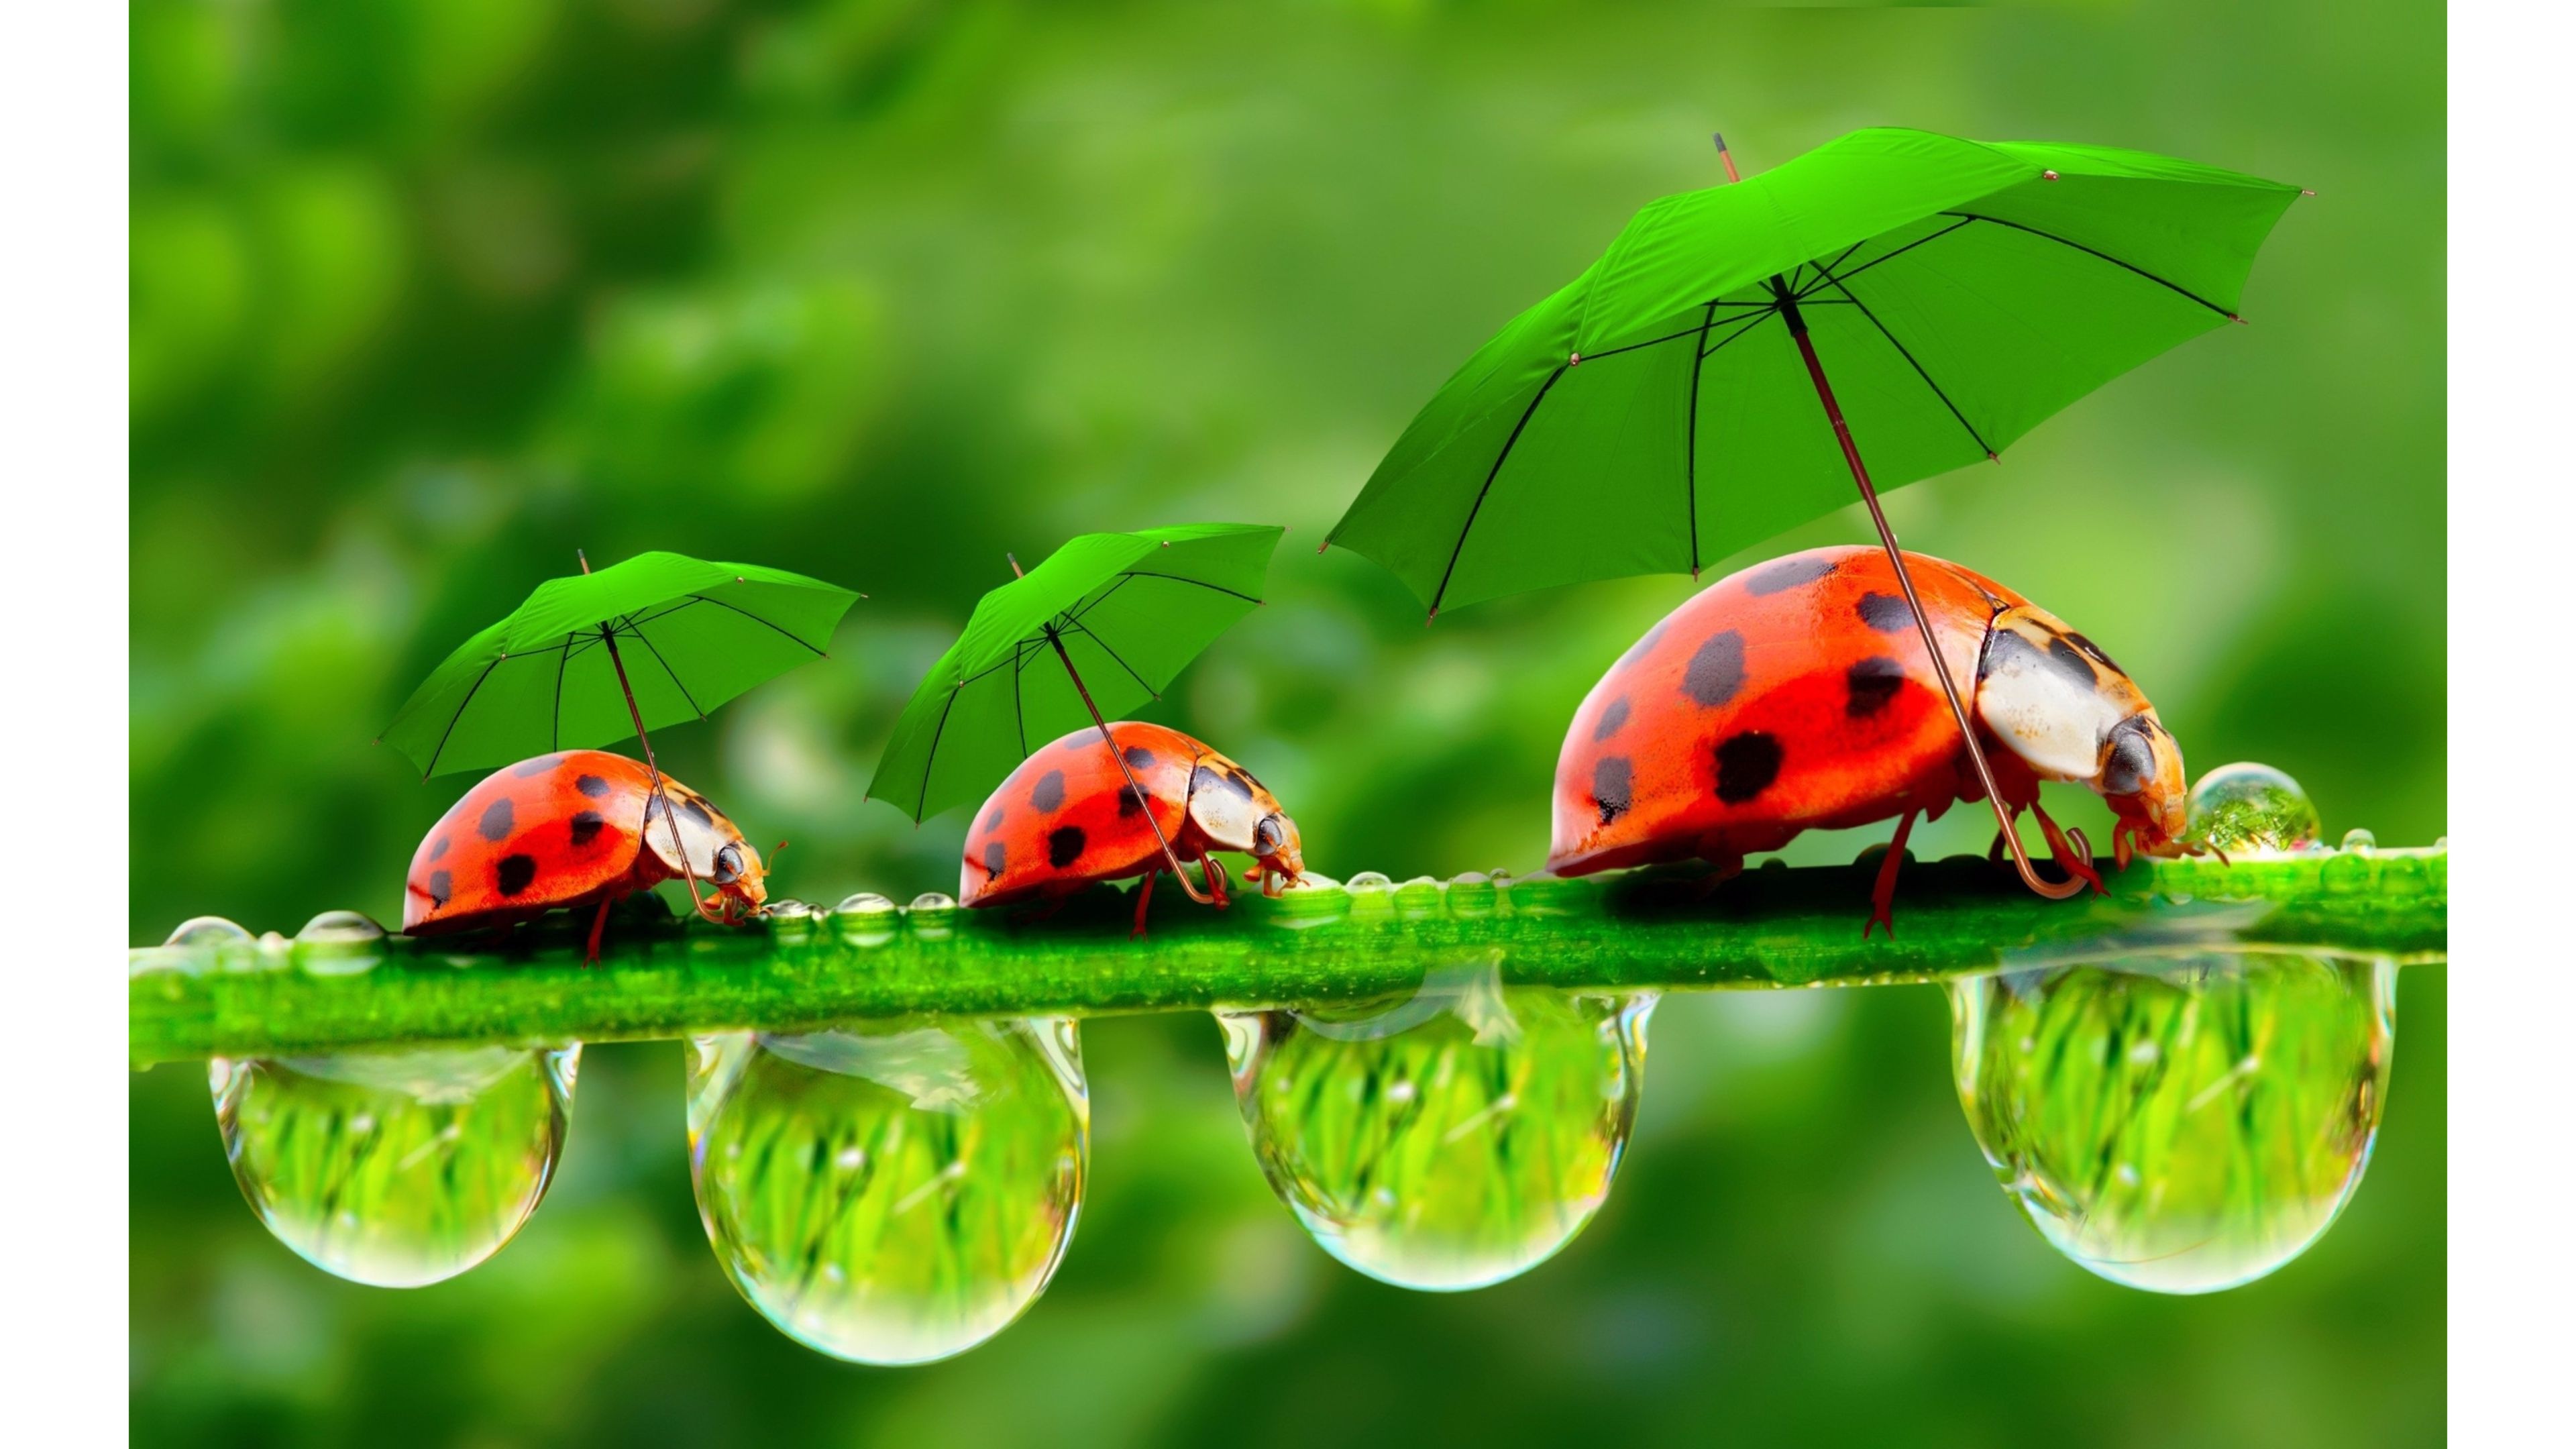 Ladybug Wallpaper For Computer With Umbrellas